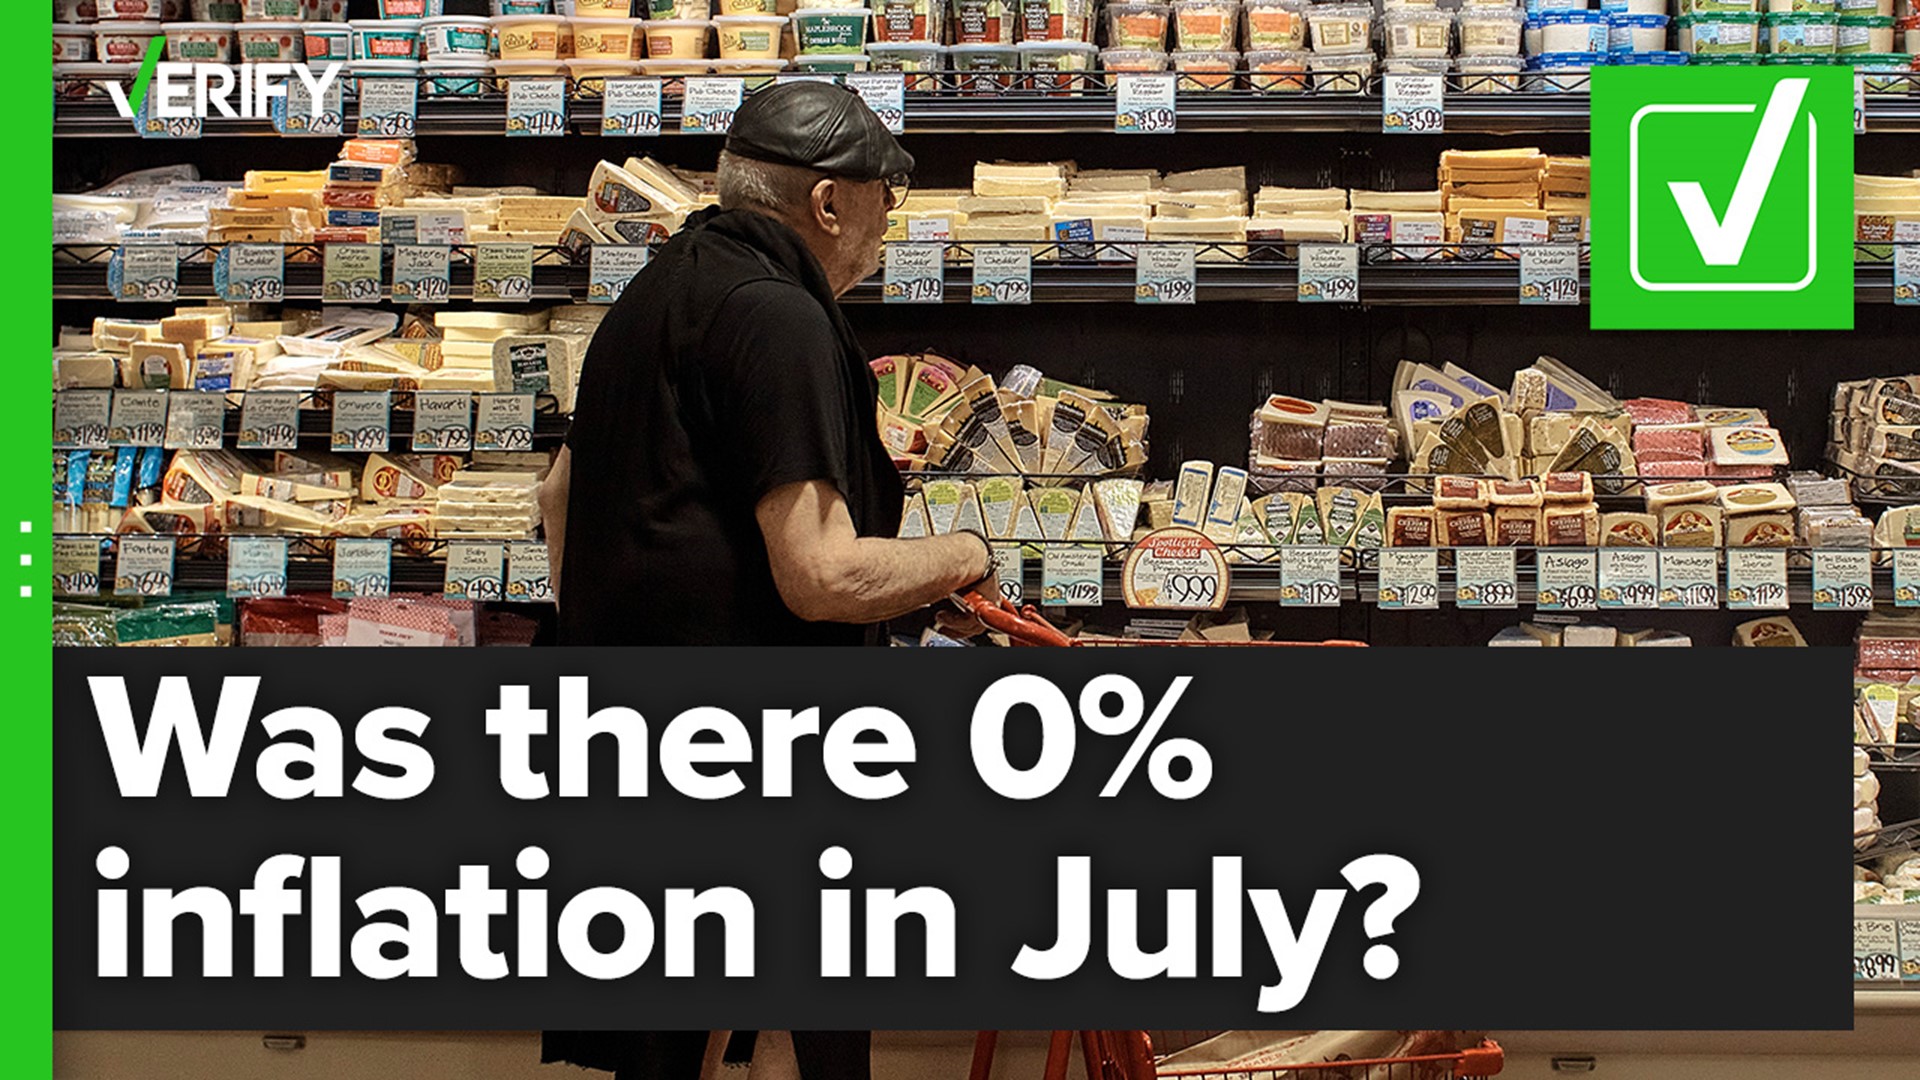 The Consumer Price Index, the most widely used measure of inflation, was unchanged in July, as President Biden claimed. But annual inflation remains high.